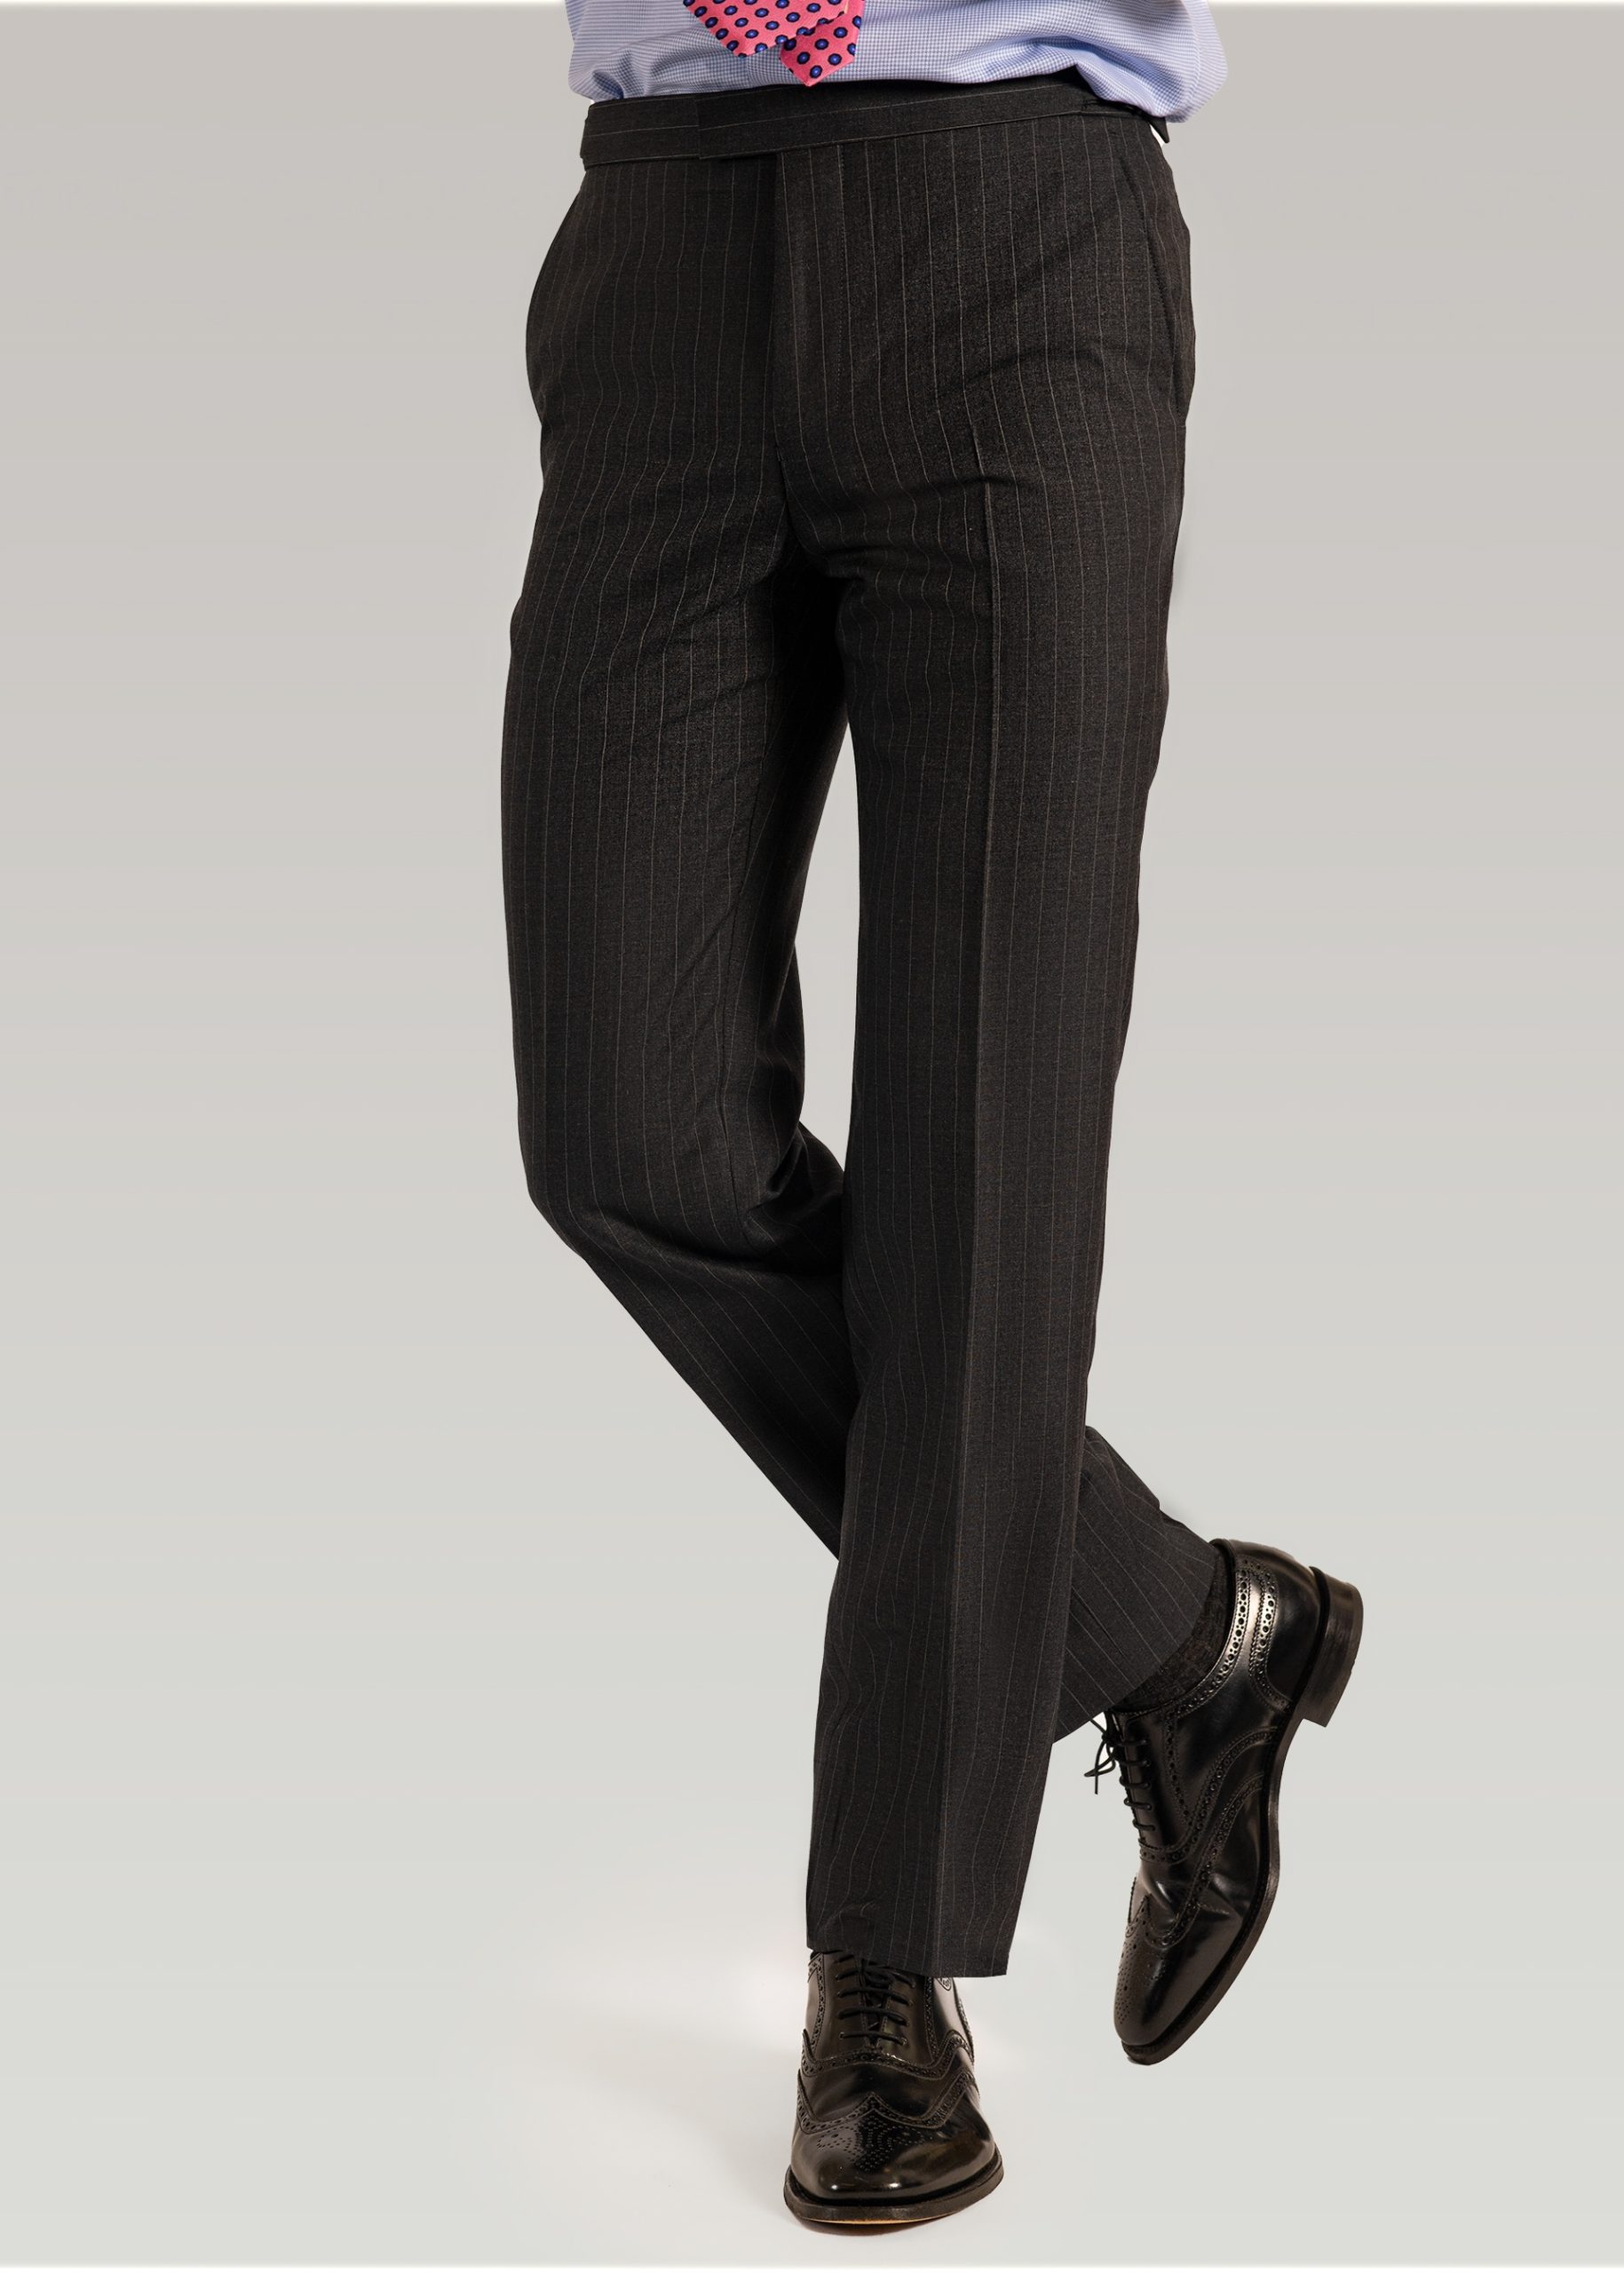 Roderick Charles grey stripe suit trouers in a tailored fit